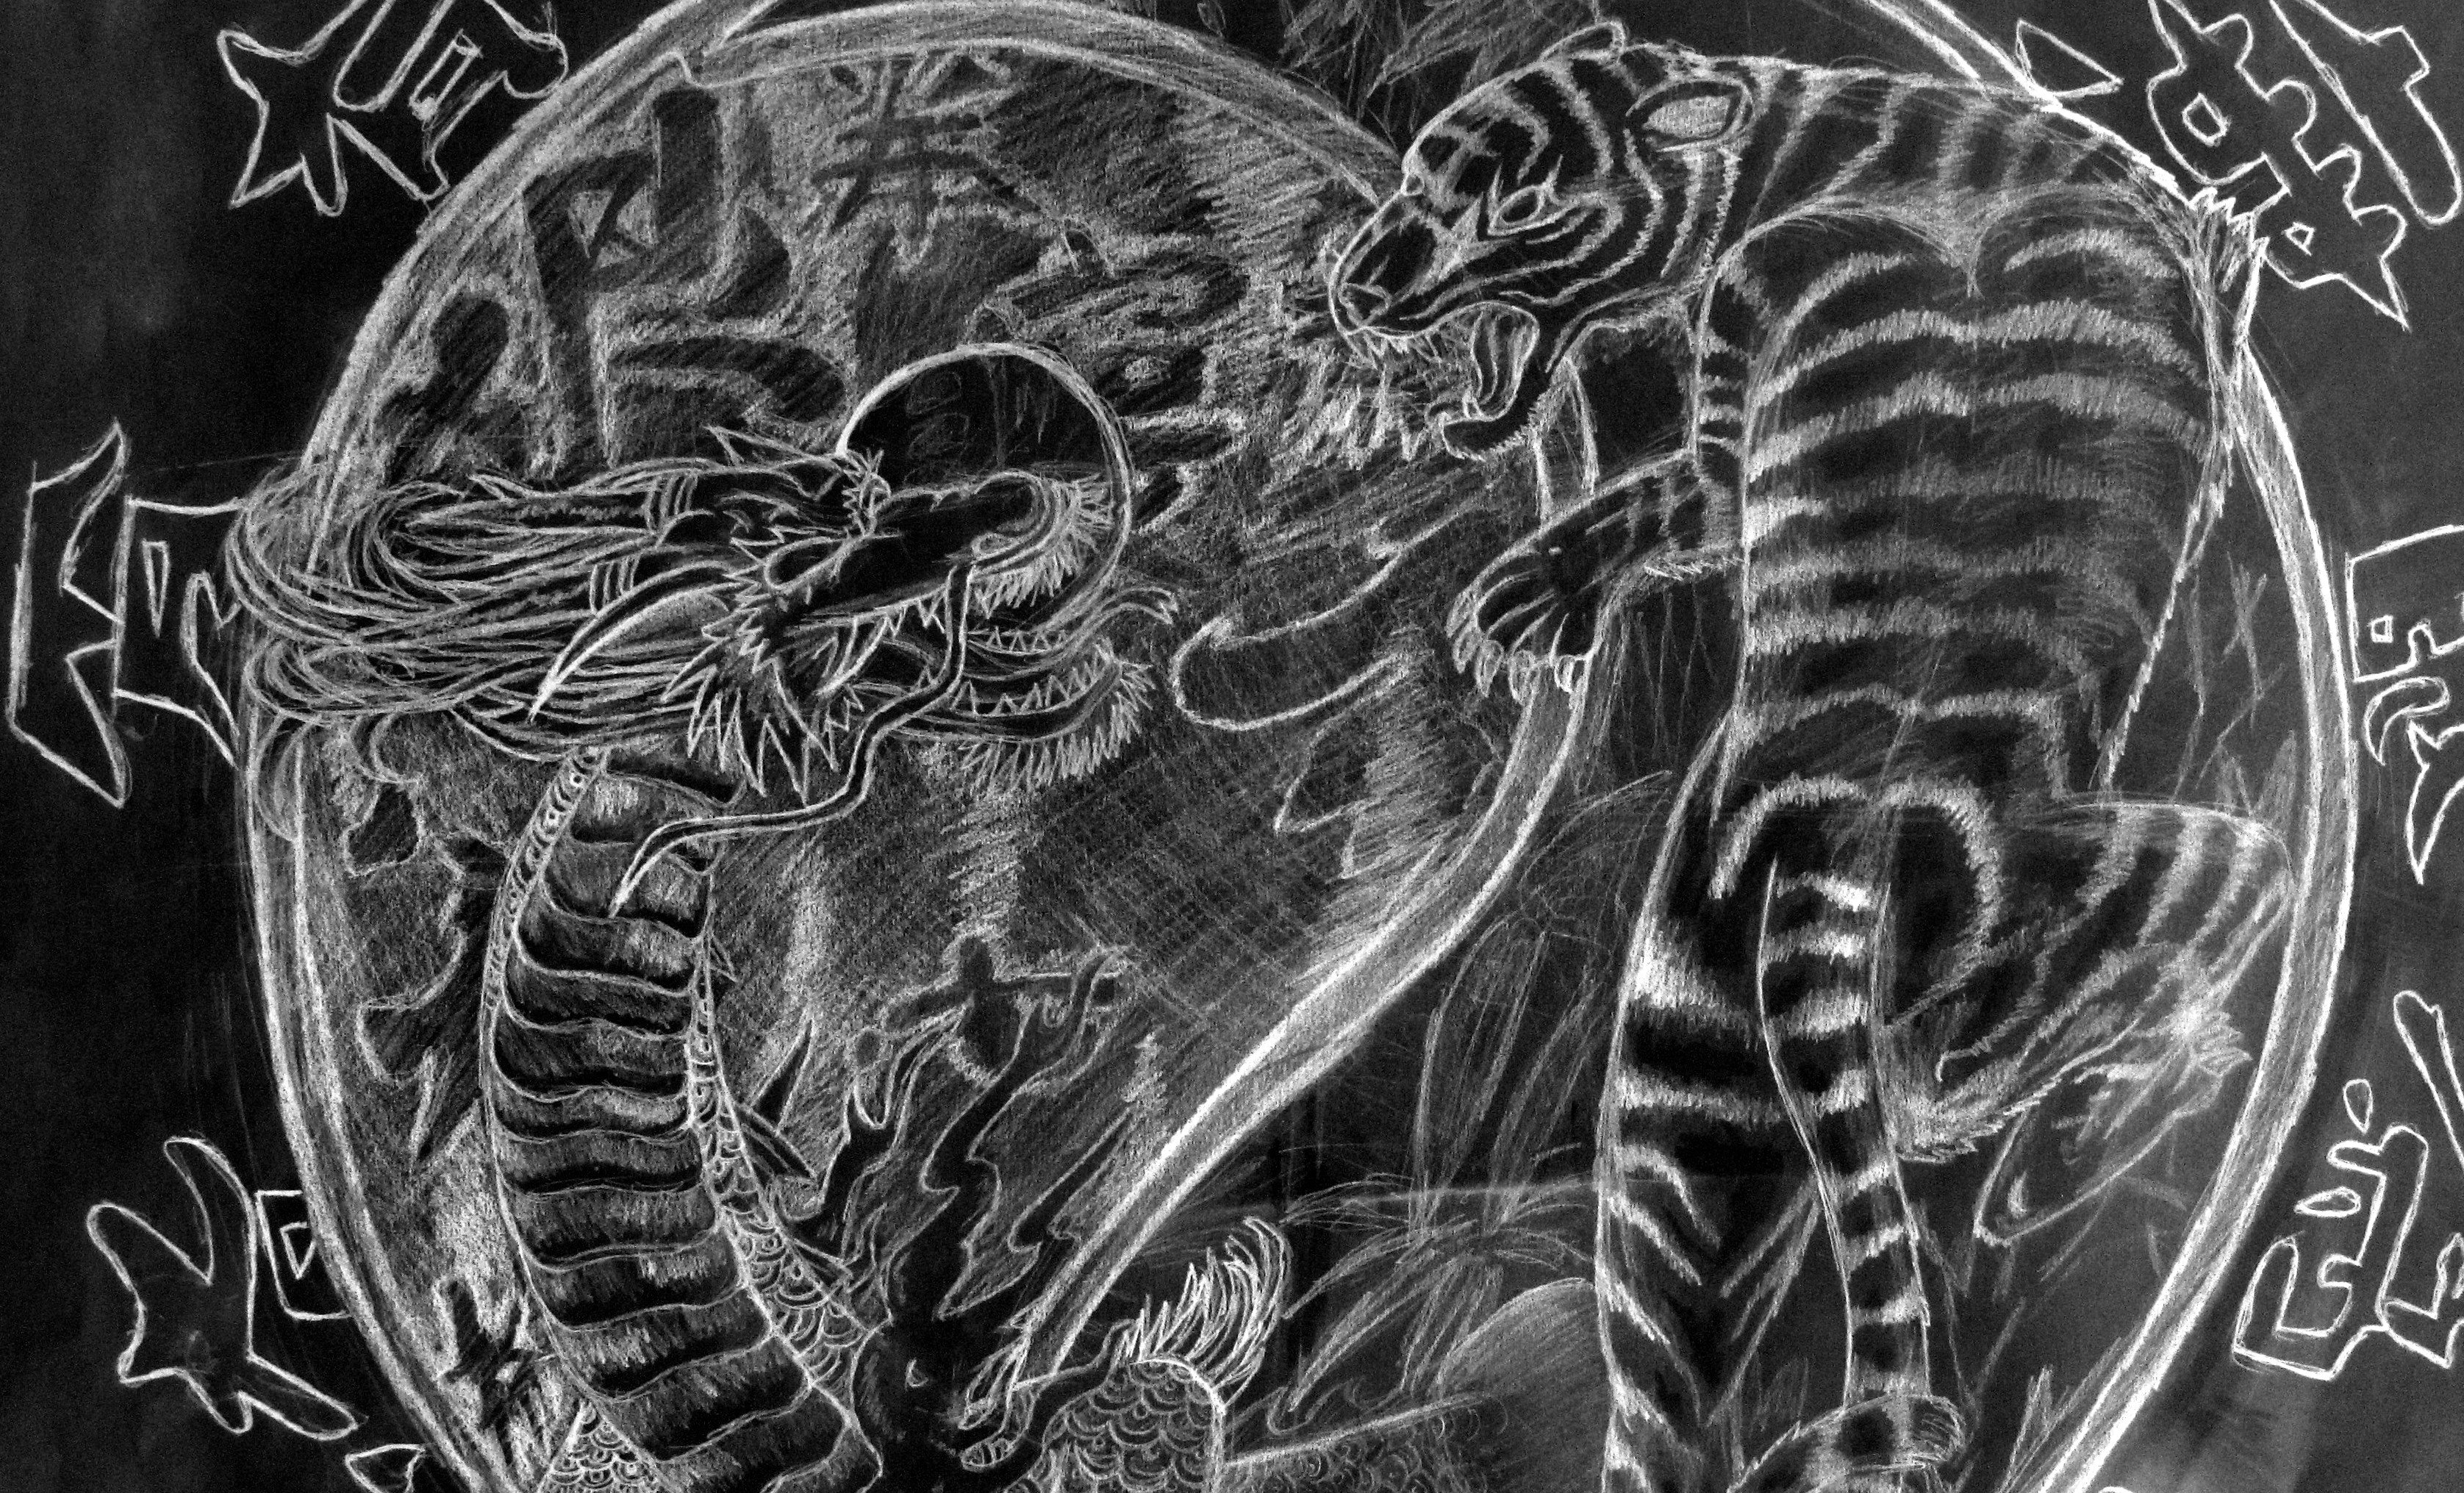 Free download tiger and dragon by CjEvIlCaT144 [3352x2031] for your Desktop, Mobile & Tablet. Explore Dragon and Tiger Wallpaper. Dragon Yin Yang Wallpaper, Tiger vs Dragon Wallpaper, Dragon Wallpaper for Phones